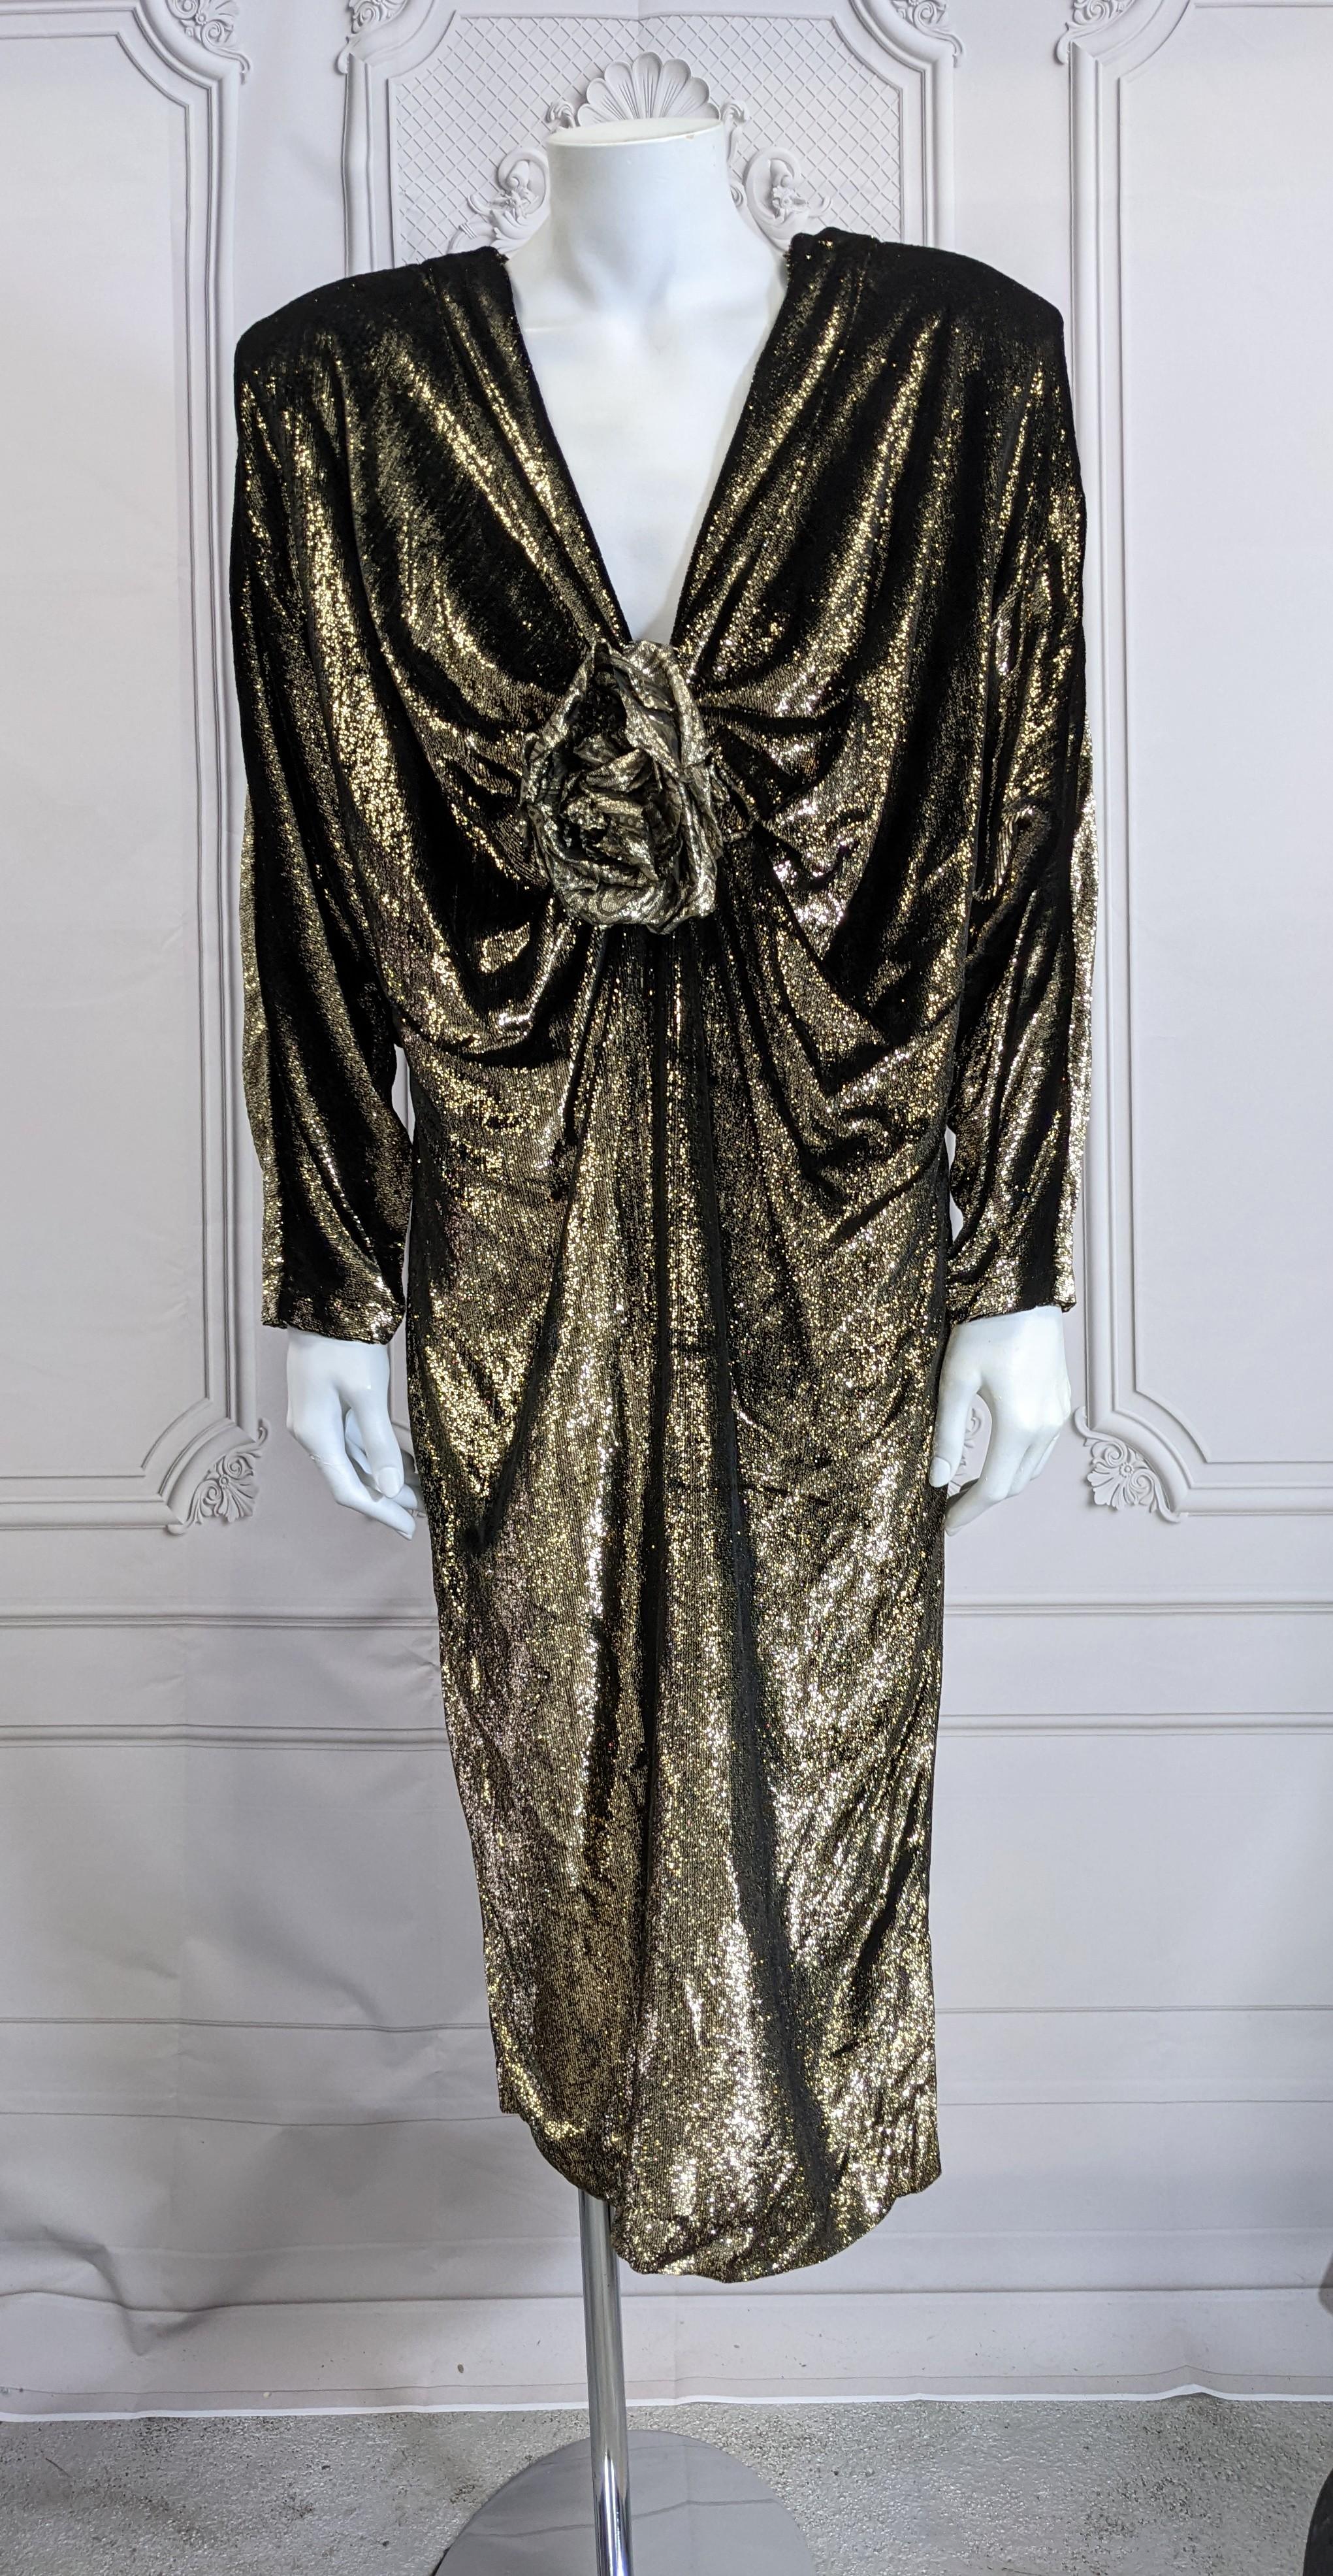 Genny by Versace Draped Lurex Velvet Cocktail Dress from the 1980's. Oversized shoulders and deep plunge accented with a gold lame textile rose. Dress pegs toward the hem from the strong shoulders (to offset period big hair) and the antique gold